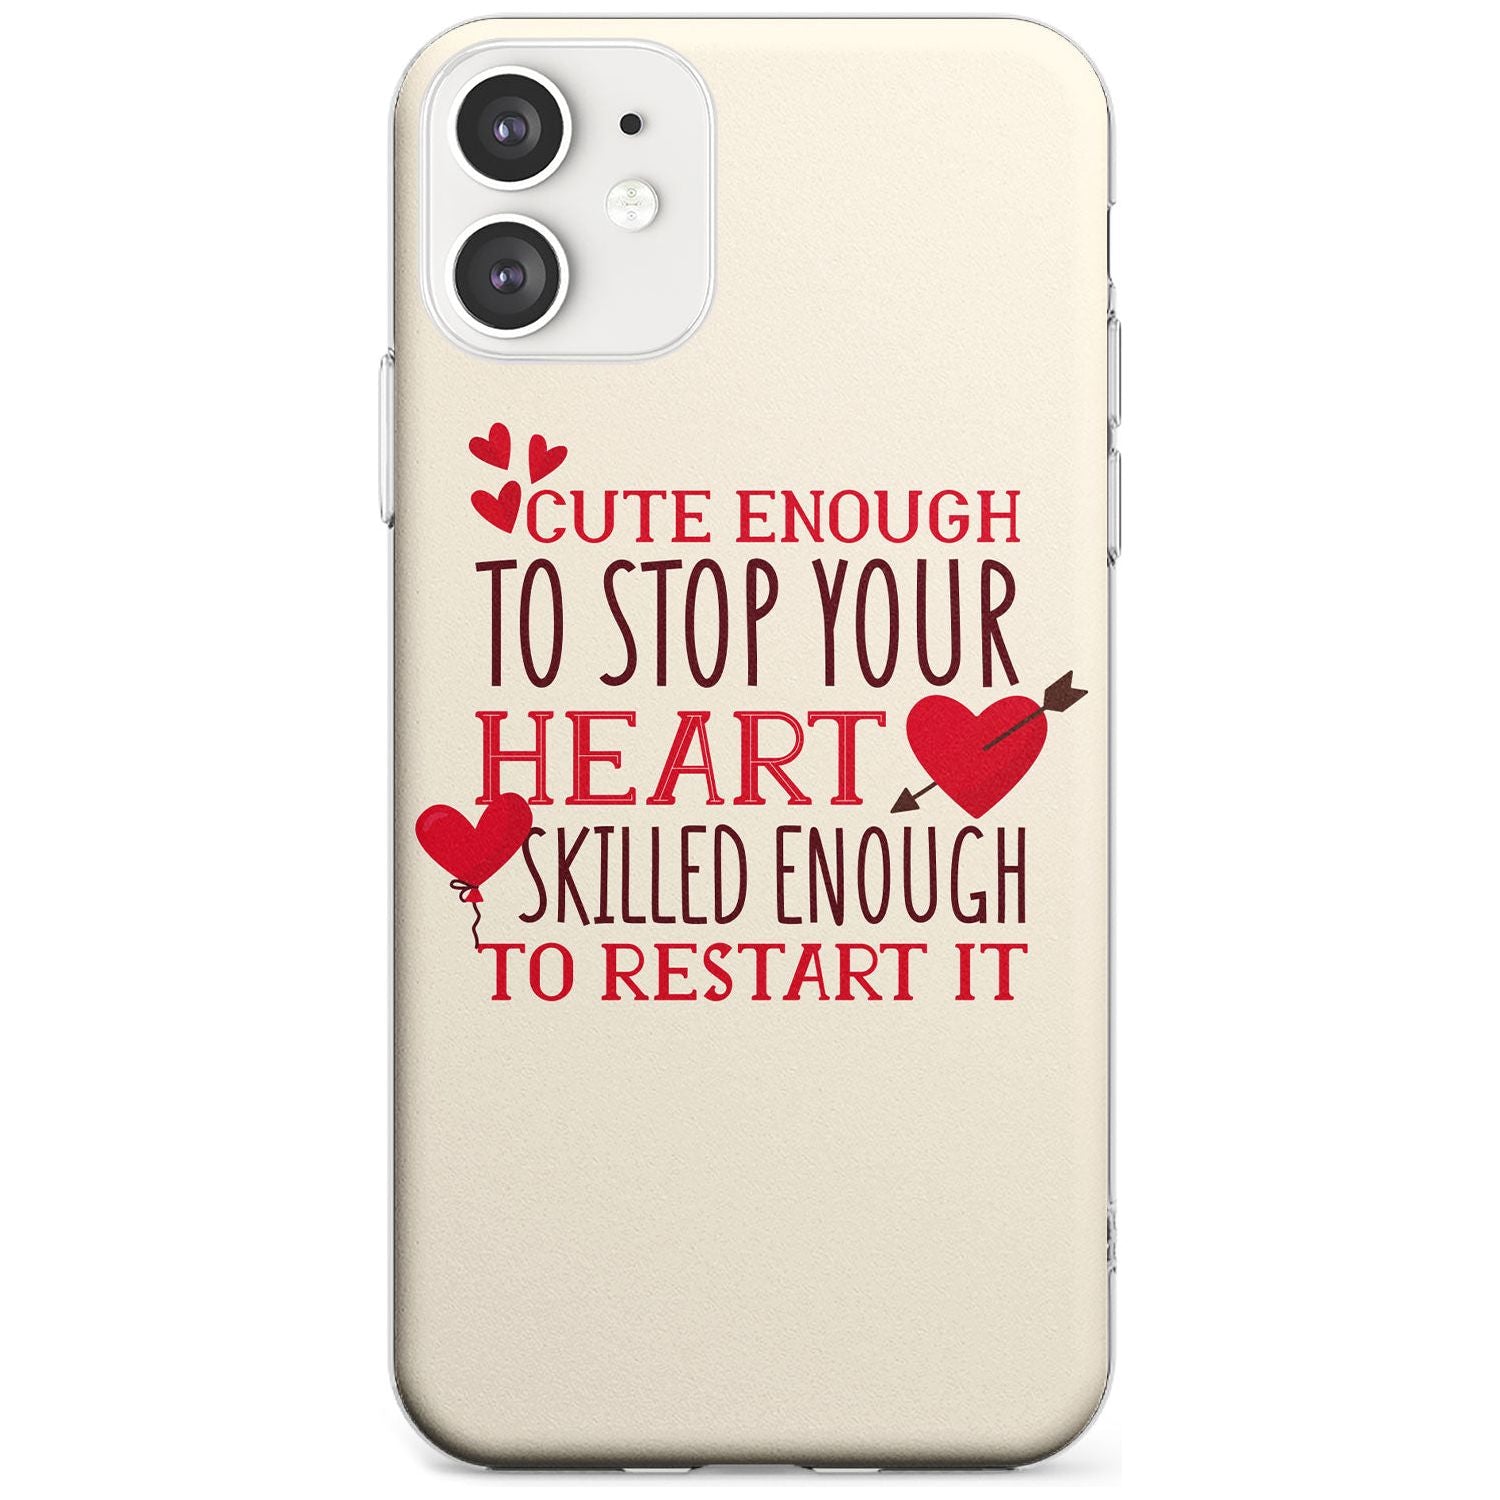 Medical Design Cute Enough to Stop Your Heart Slim TPU Phone Case for iPhone 11